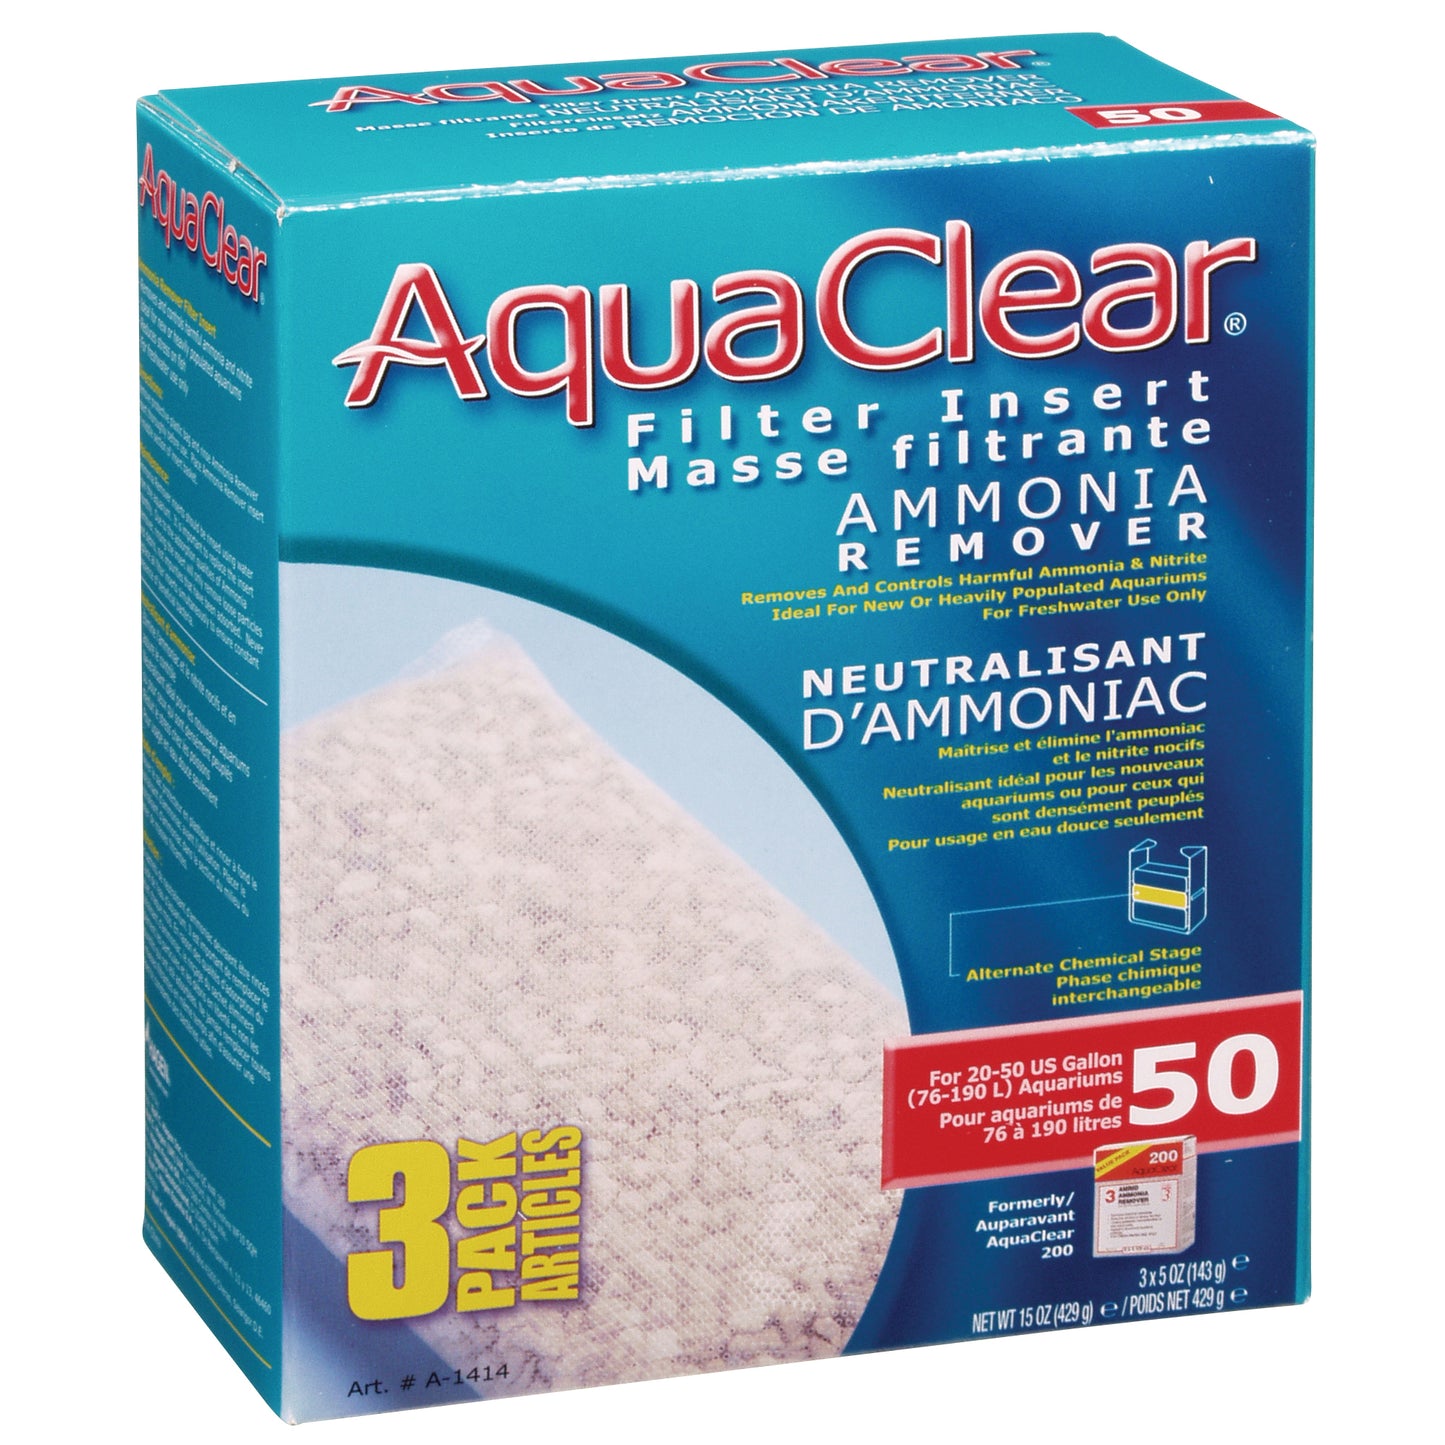 AquaClear Ammonia Remover Filter 3 Pack